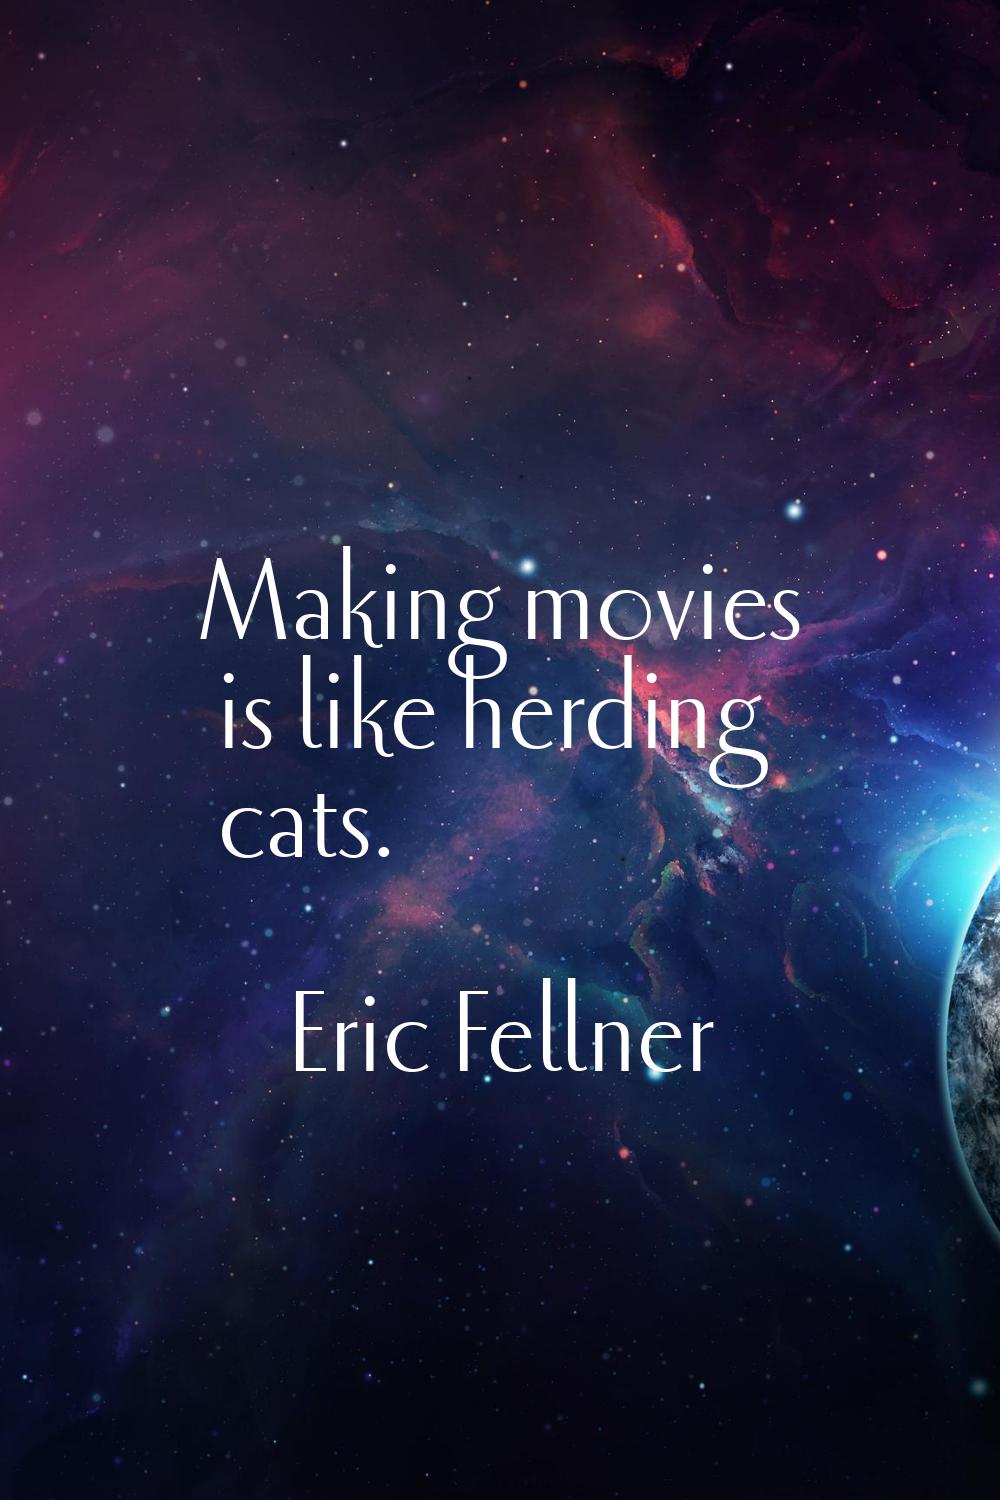 Making movies is like herding cats.